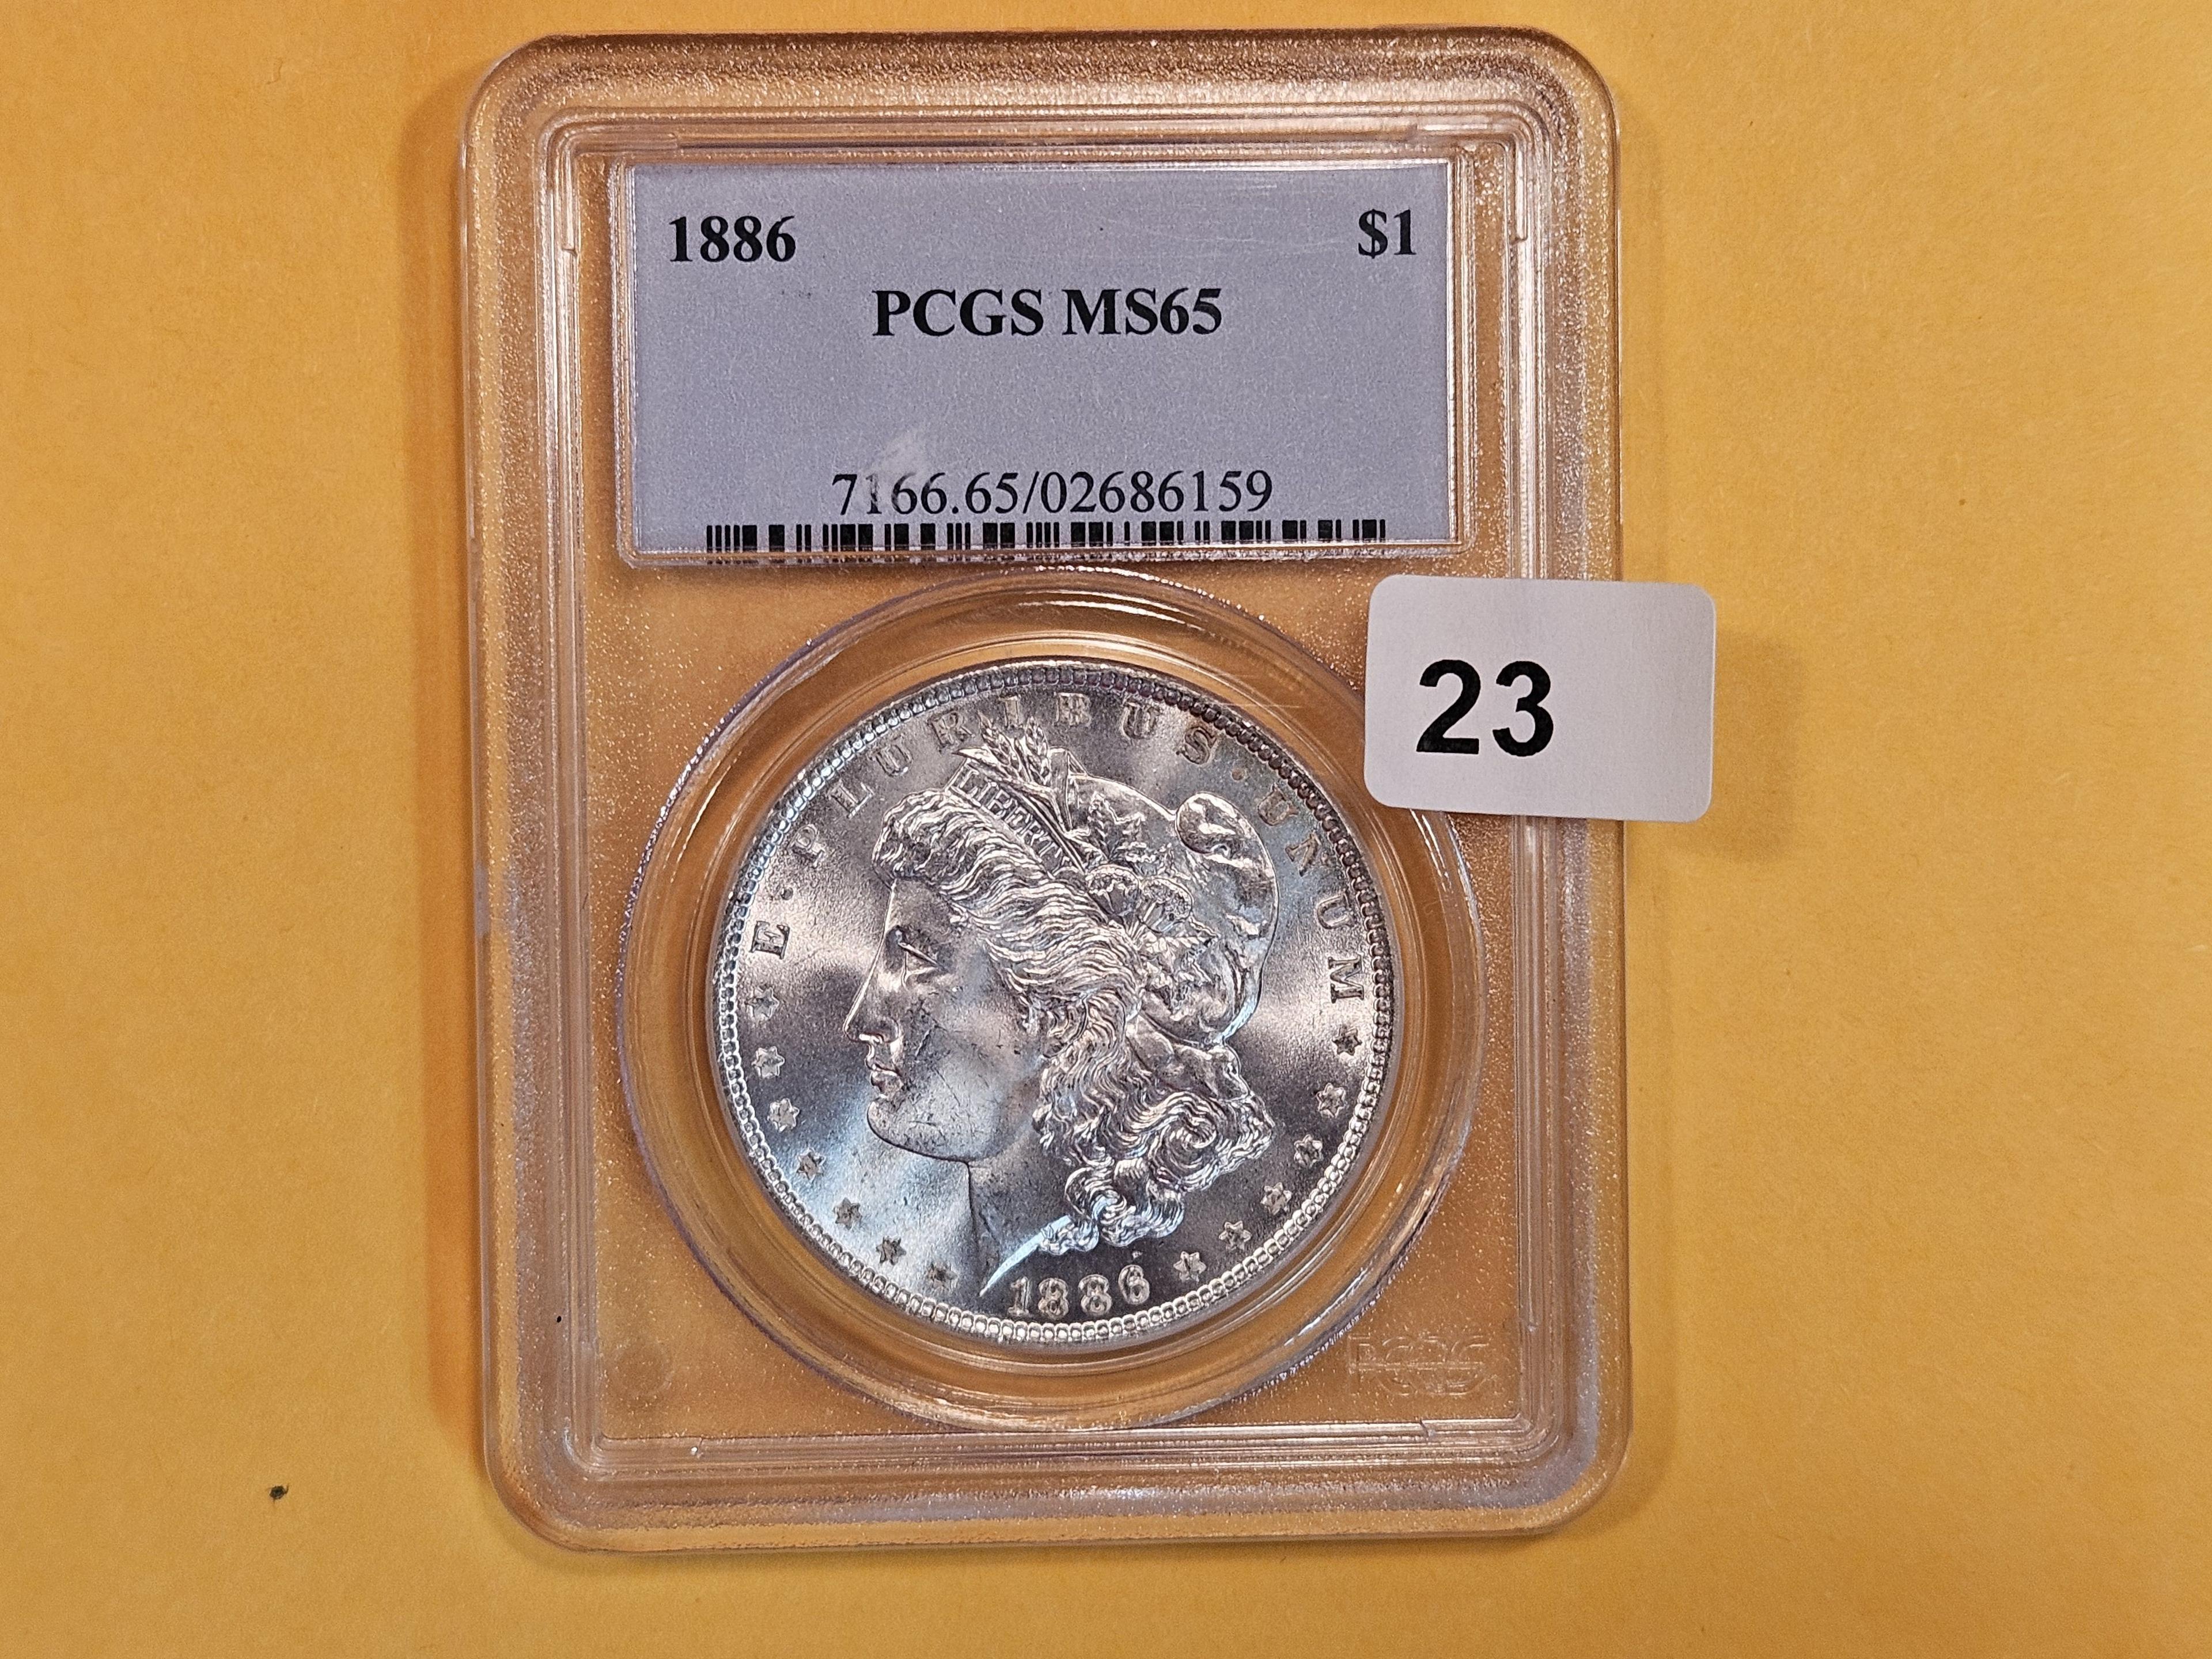 VARIETY! PCGS 1886 Morgan Dollar in Mint State 65